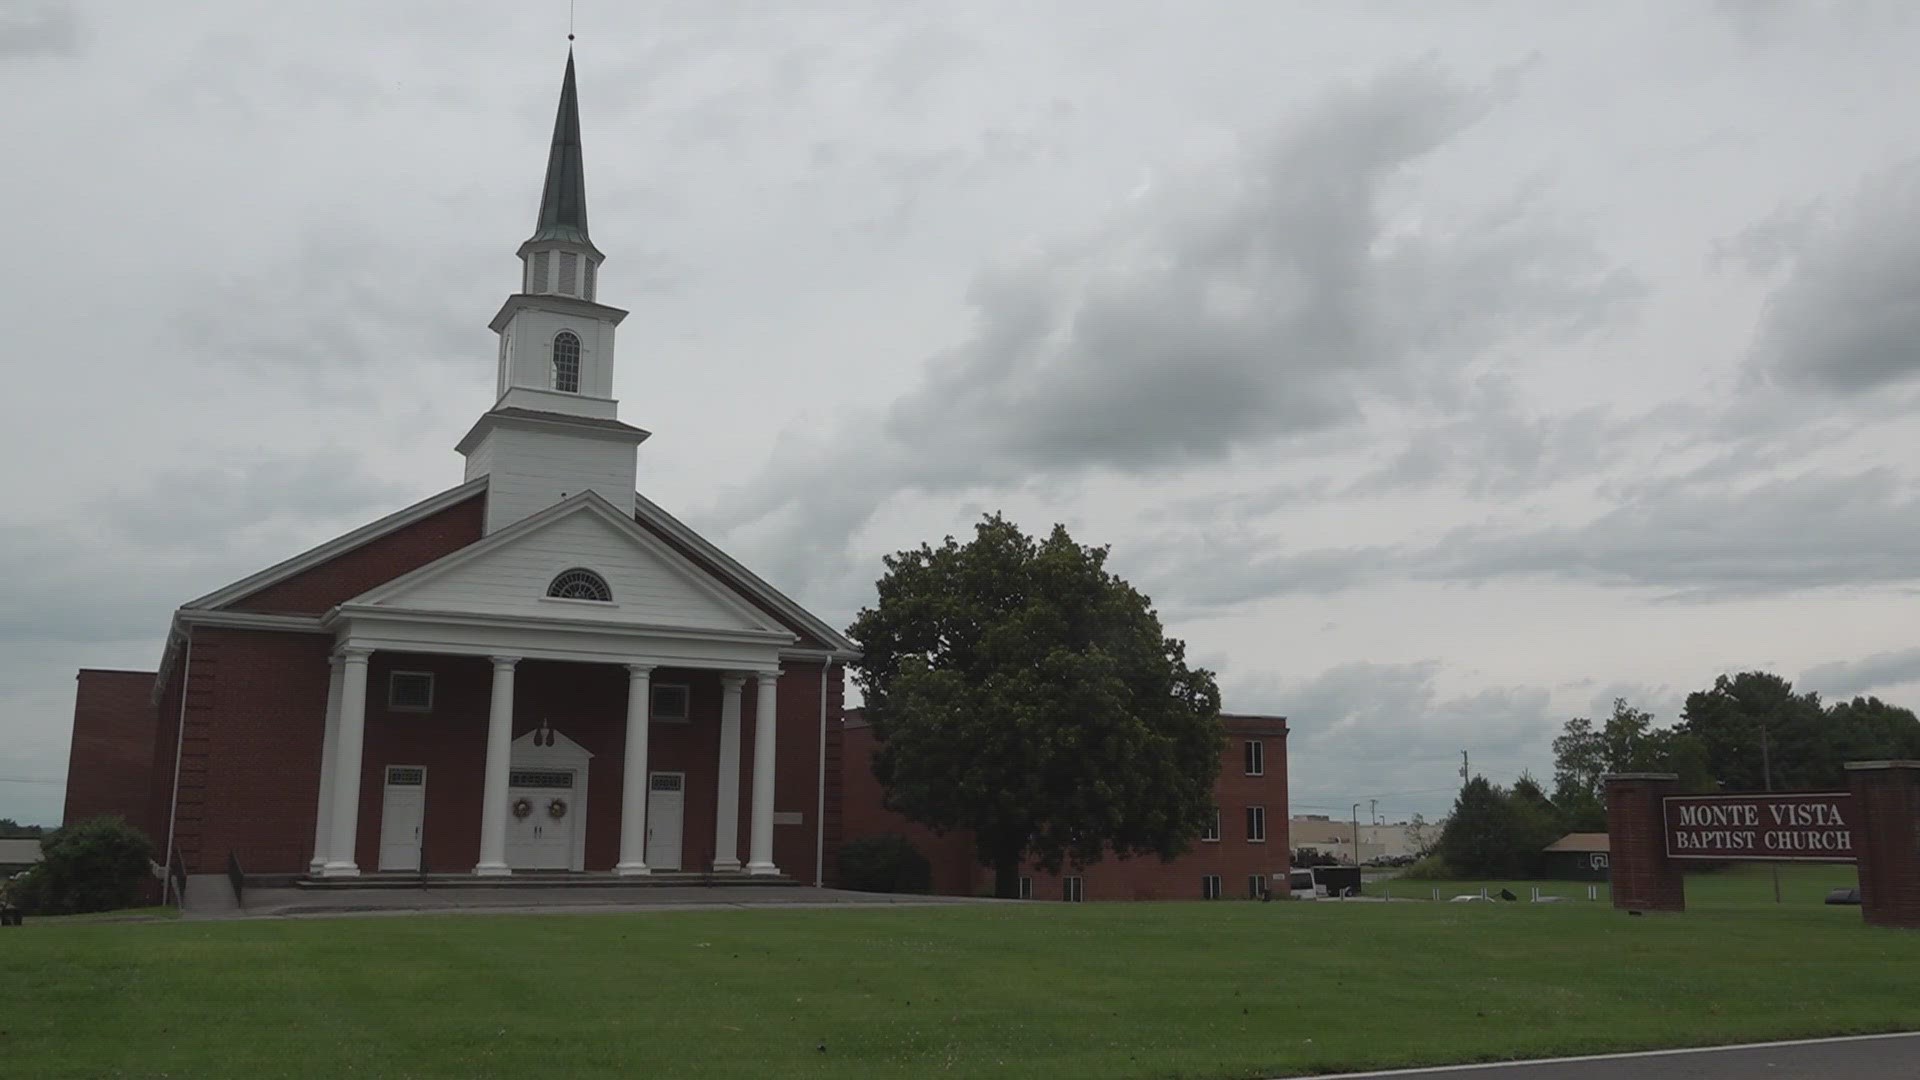 The Southern Baptist Convention recently voted to make only men eligible to serve as pastors, according to a release from the Monte Vista Baptist Church.